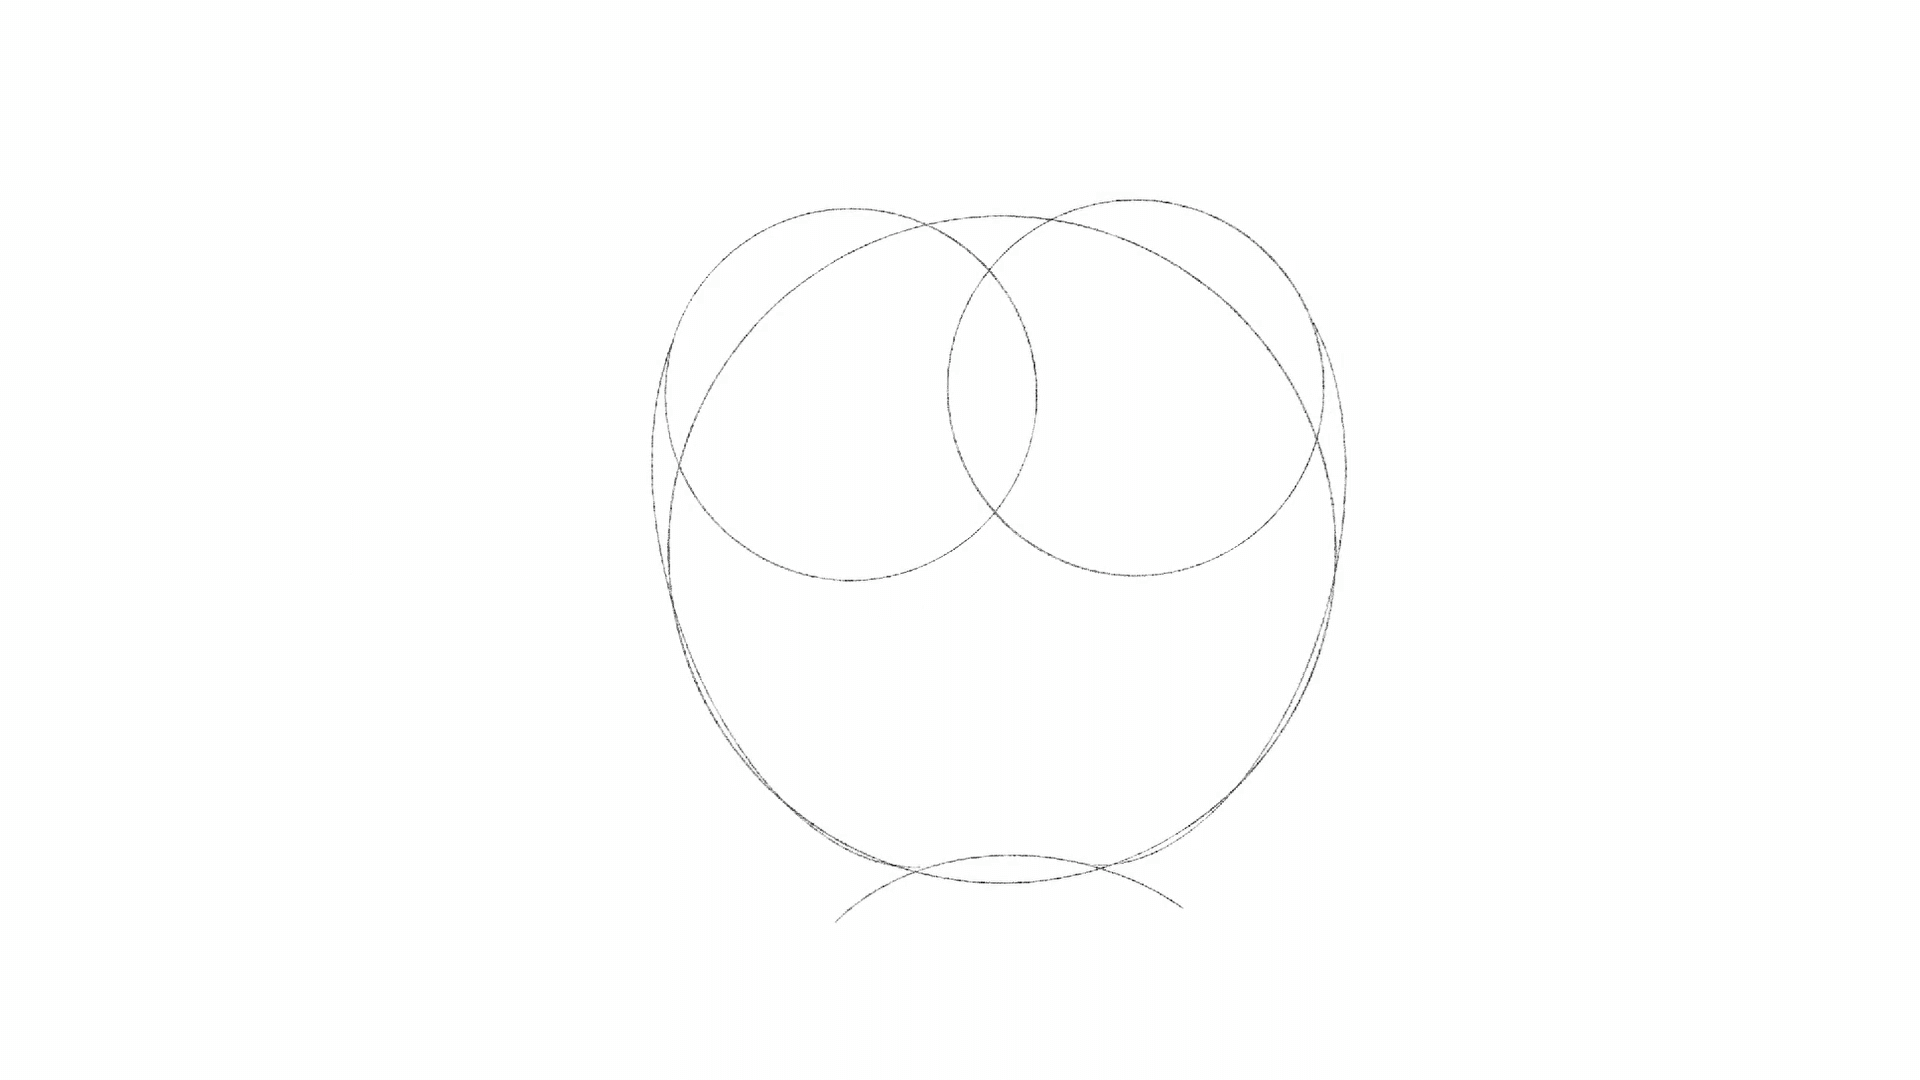 Step 3 of drawing the Apple logo: Draw two arcs connecting the smaller and larger circles